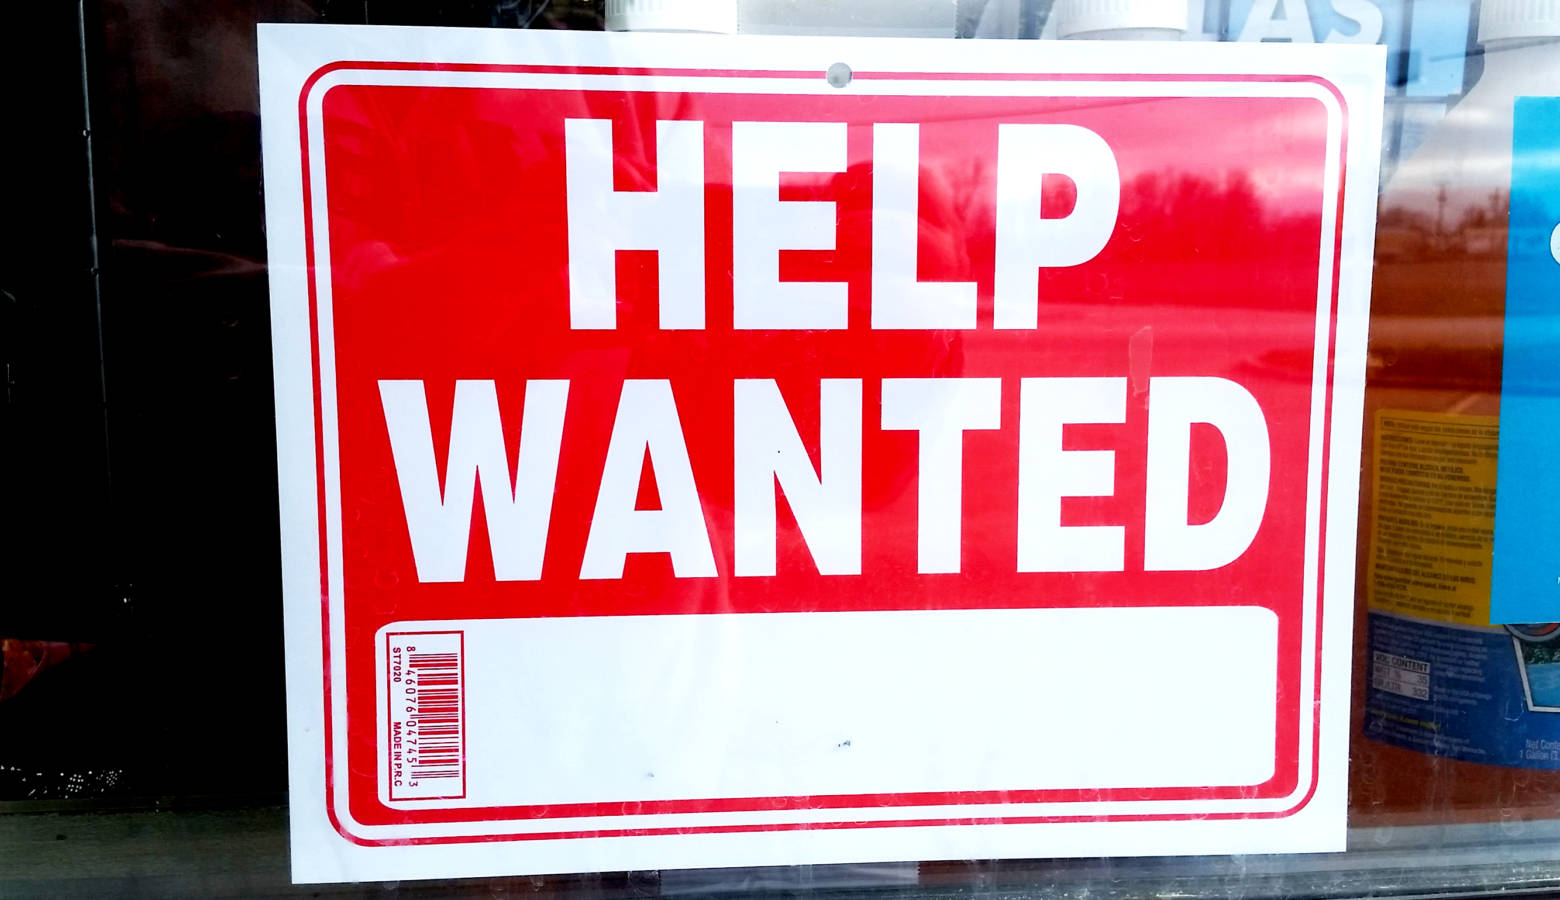 Indiana ended 2018 with an unemployment rate about nine percent worse than where it started the year. (Lauren Chapman/IPB News)